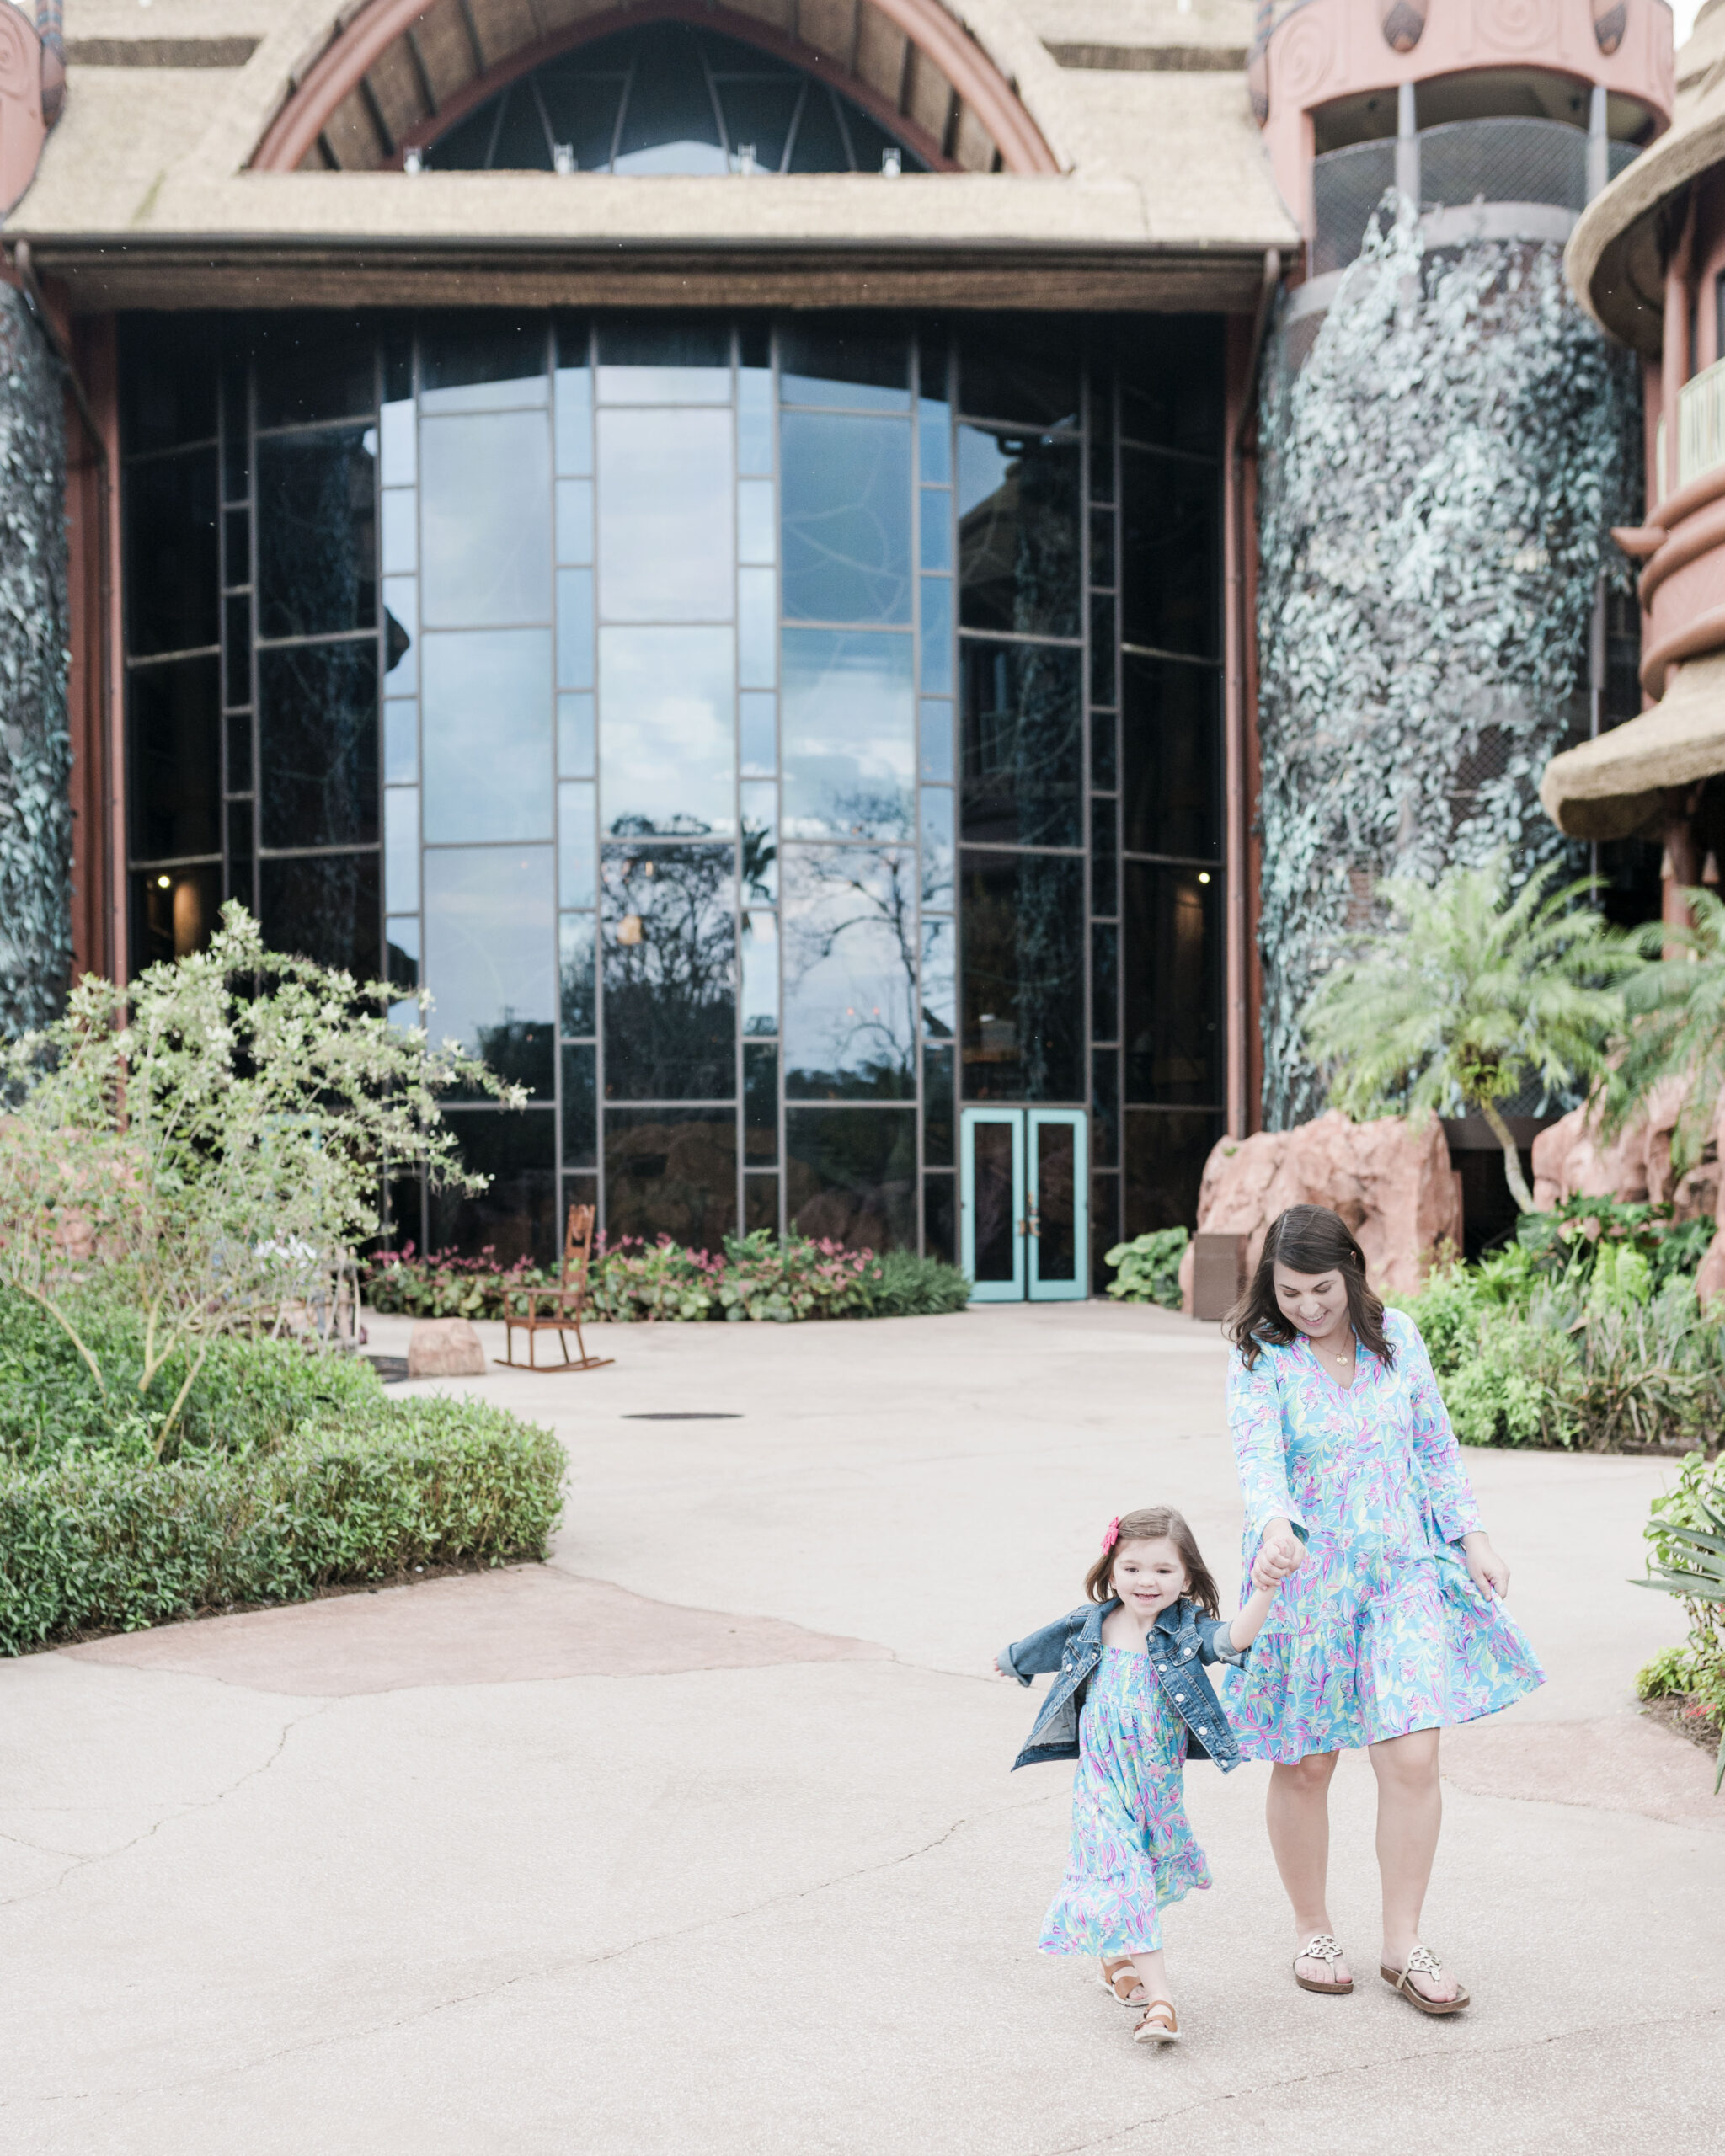 mother and daughter holding hands in matching dresses walking toward camera, animal king lodge in background dvc rentals